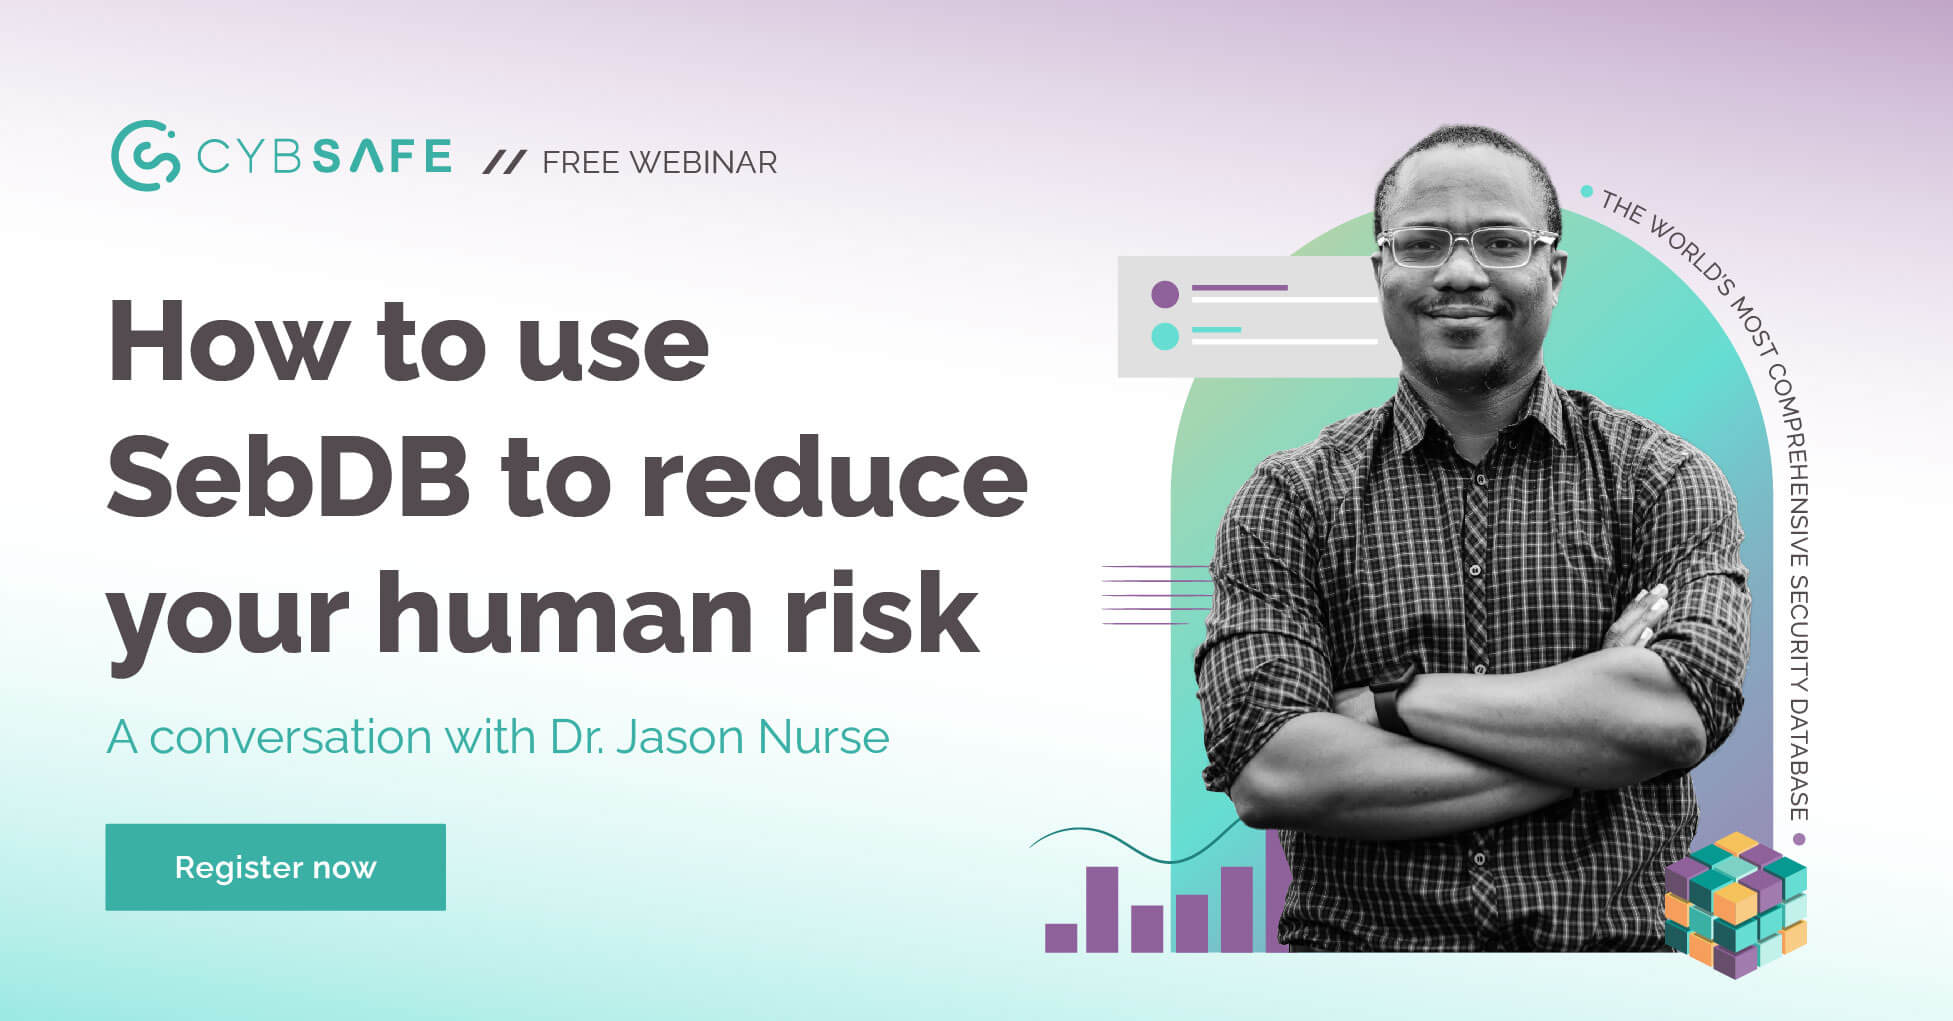 How to use DebDB to reduce your human risk